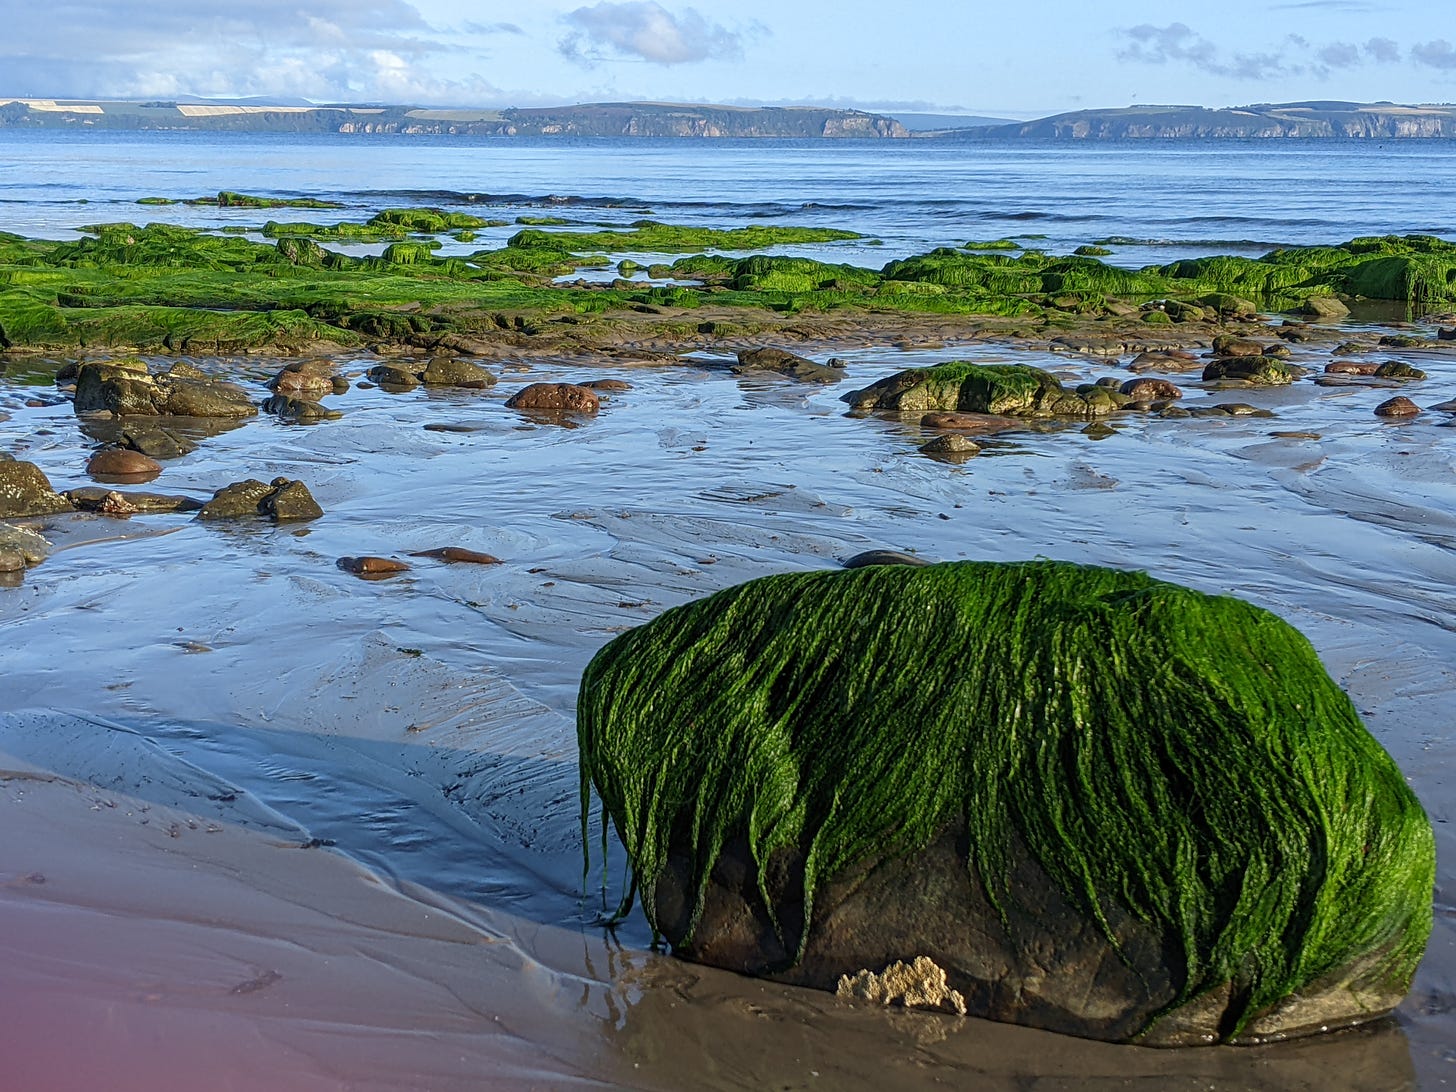 Rocks on the beach covered in green with the blue sea and the hills of the Black isle on the horizon